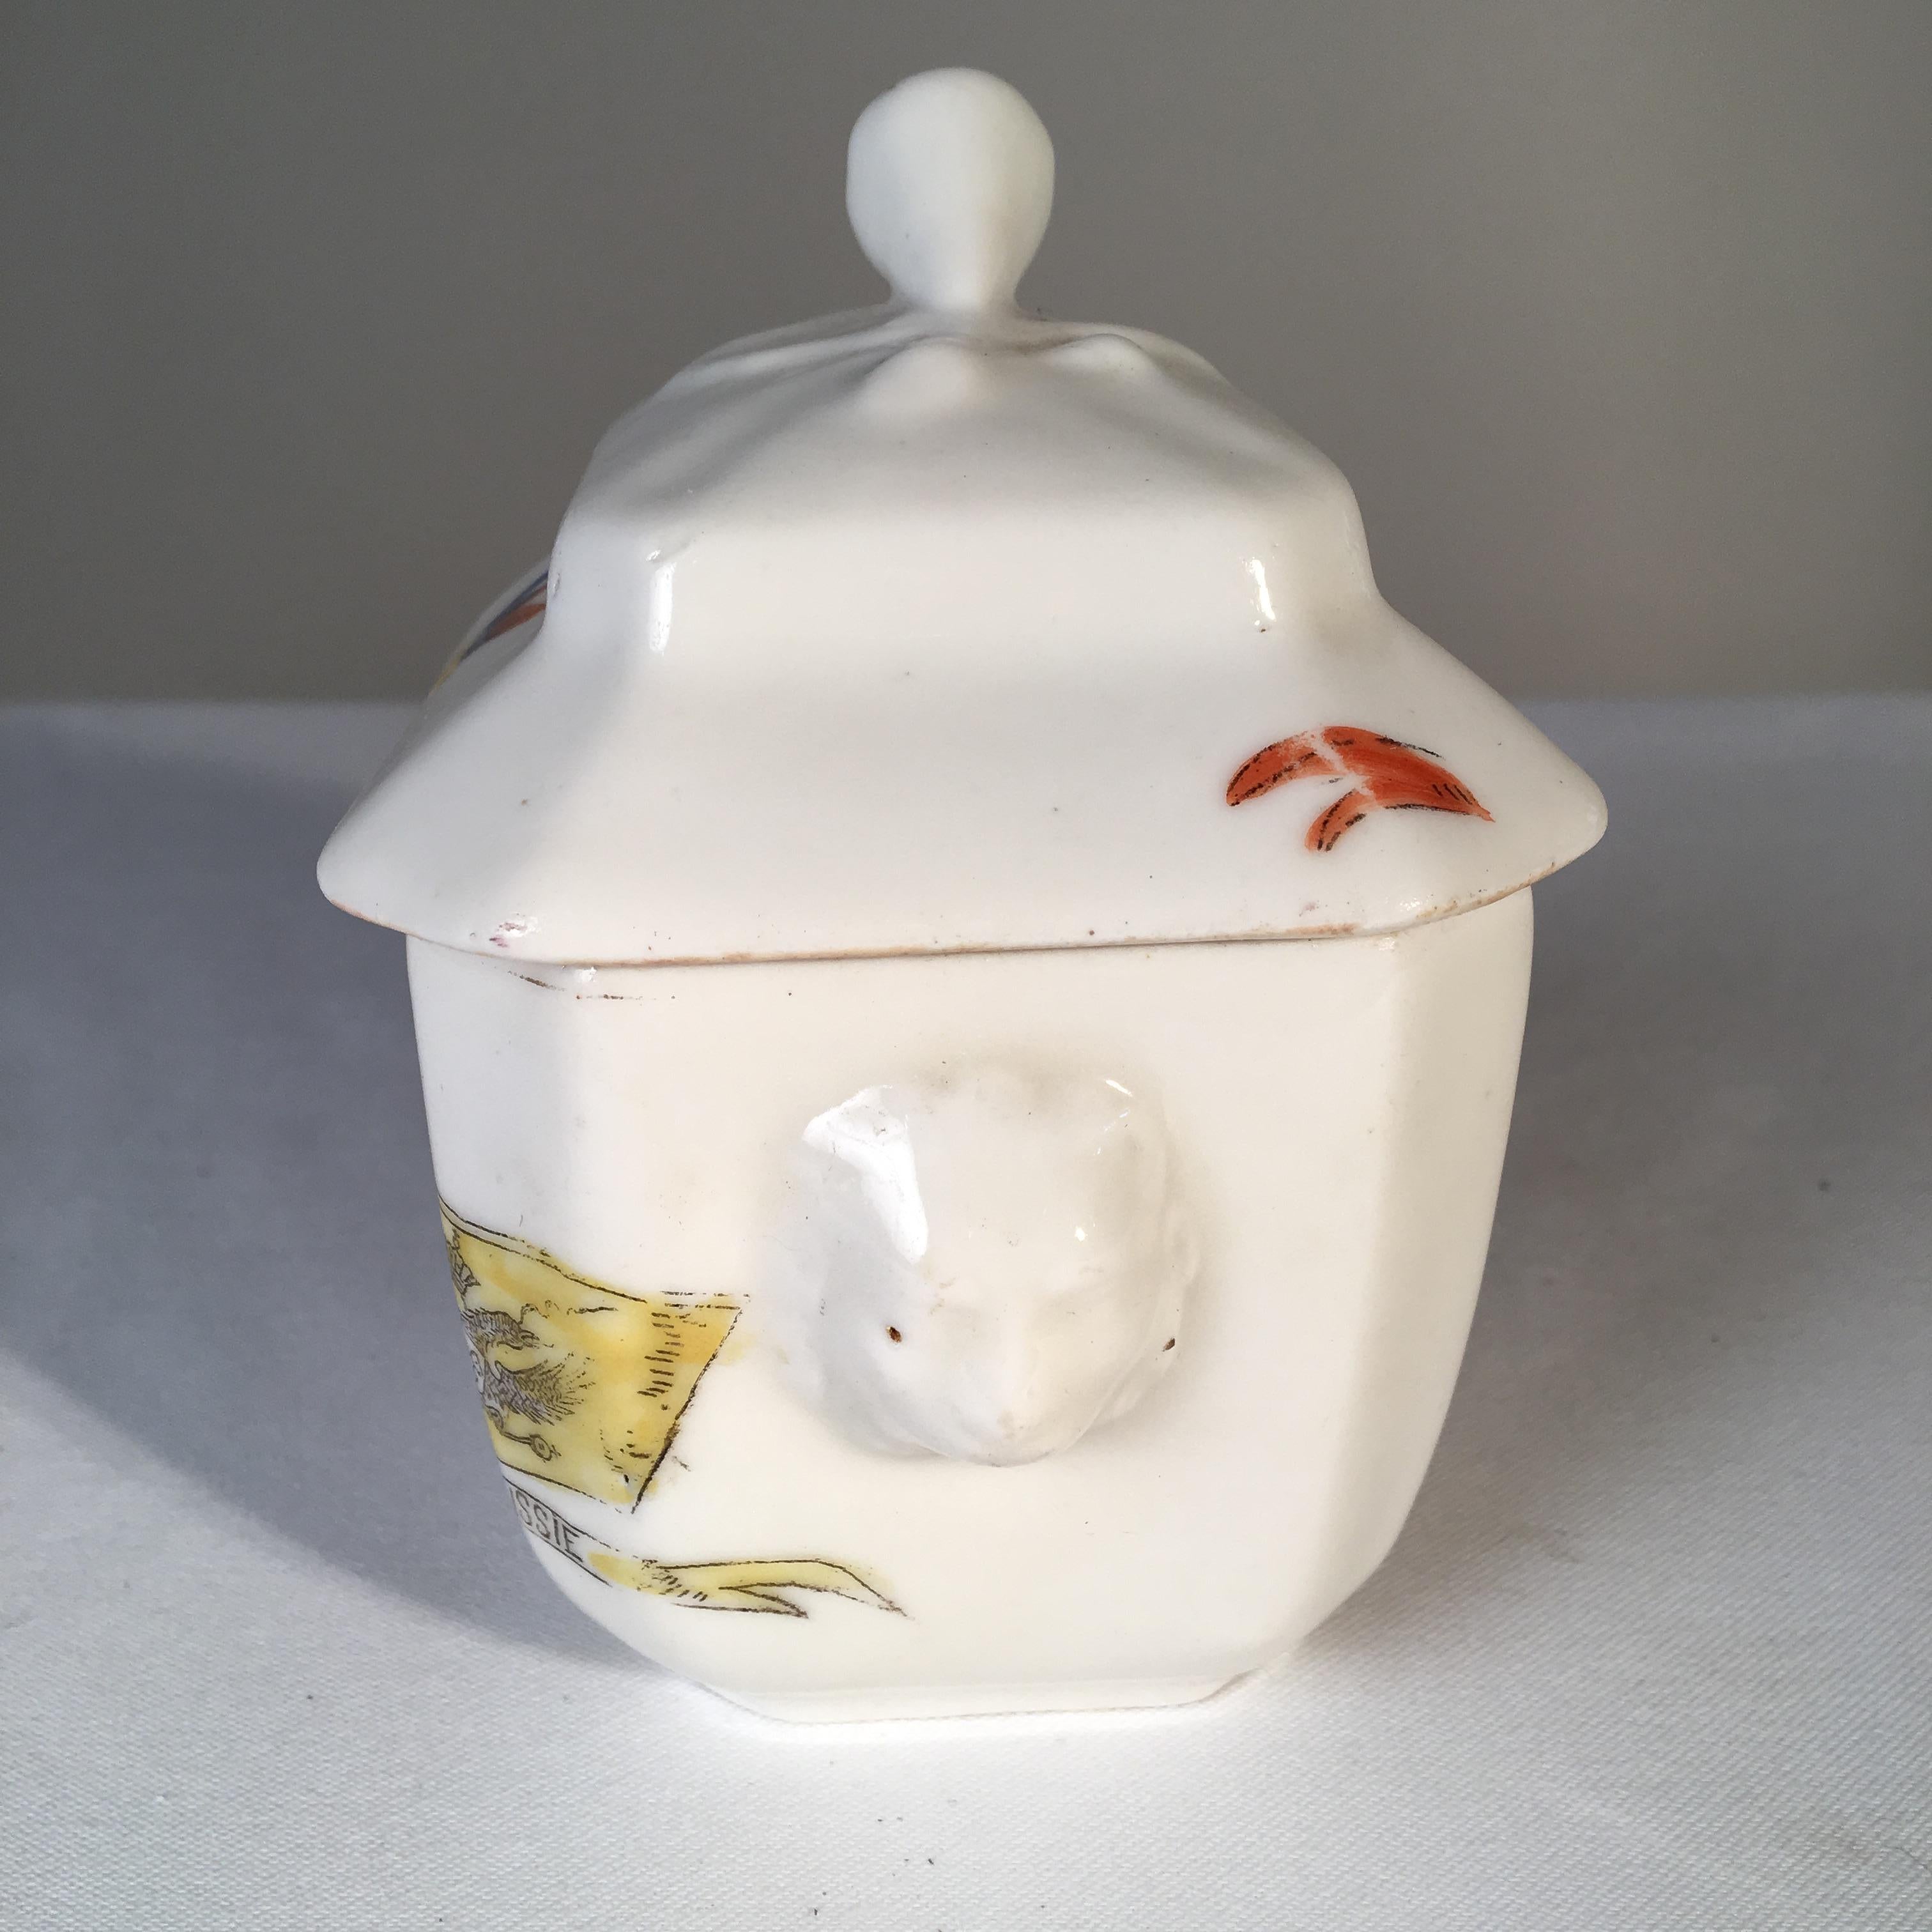 A porcelain sugar bowl with lid commemorating the cease-fire in the Franco-Prussian War, circa 1871. Collection of Pierre Moulin, founder of Pierre Deux shops.